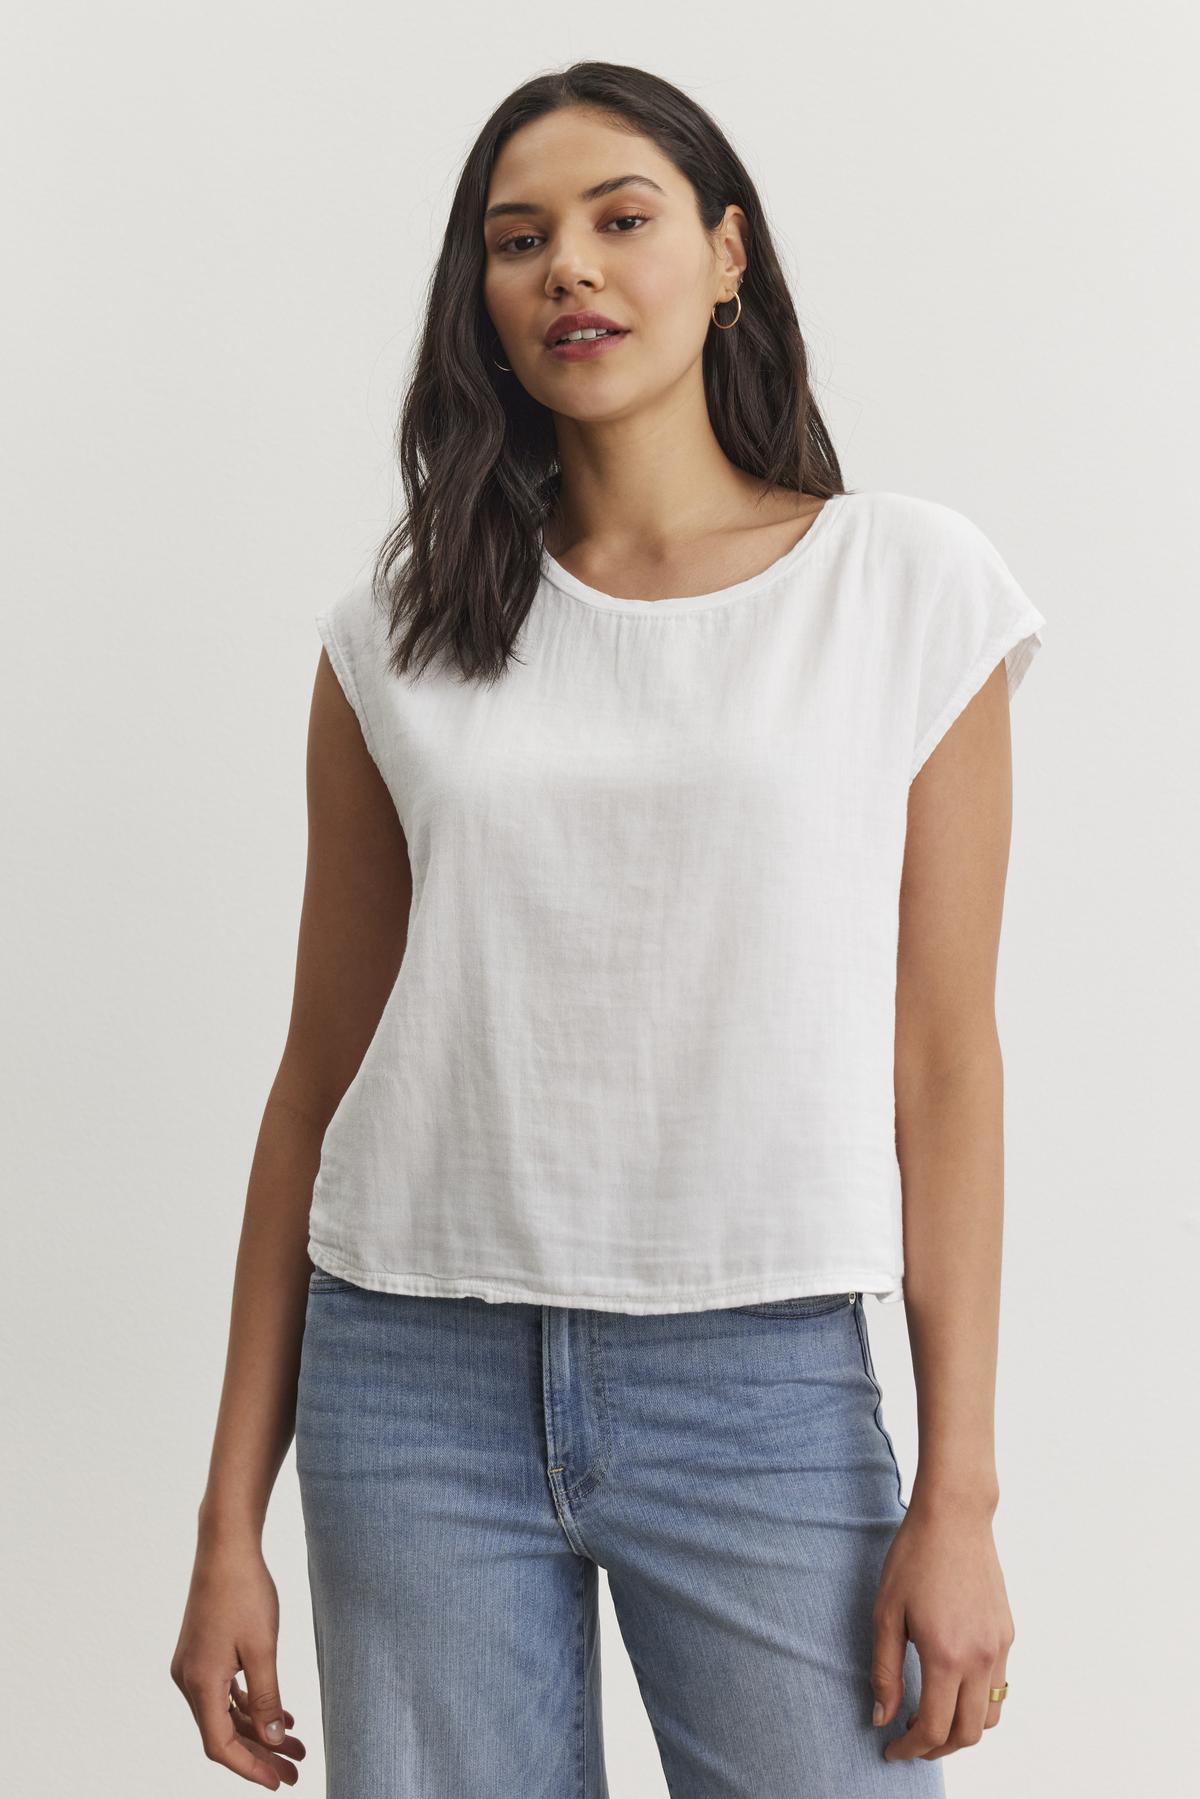 A woman with dark hair, wearing the DANIELLA CREW NECK TEE by Velvet by Graham & Spencer and blue jeans, stands against a plain white background.-37074420990145